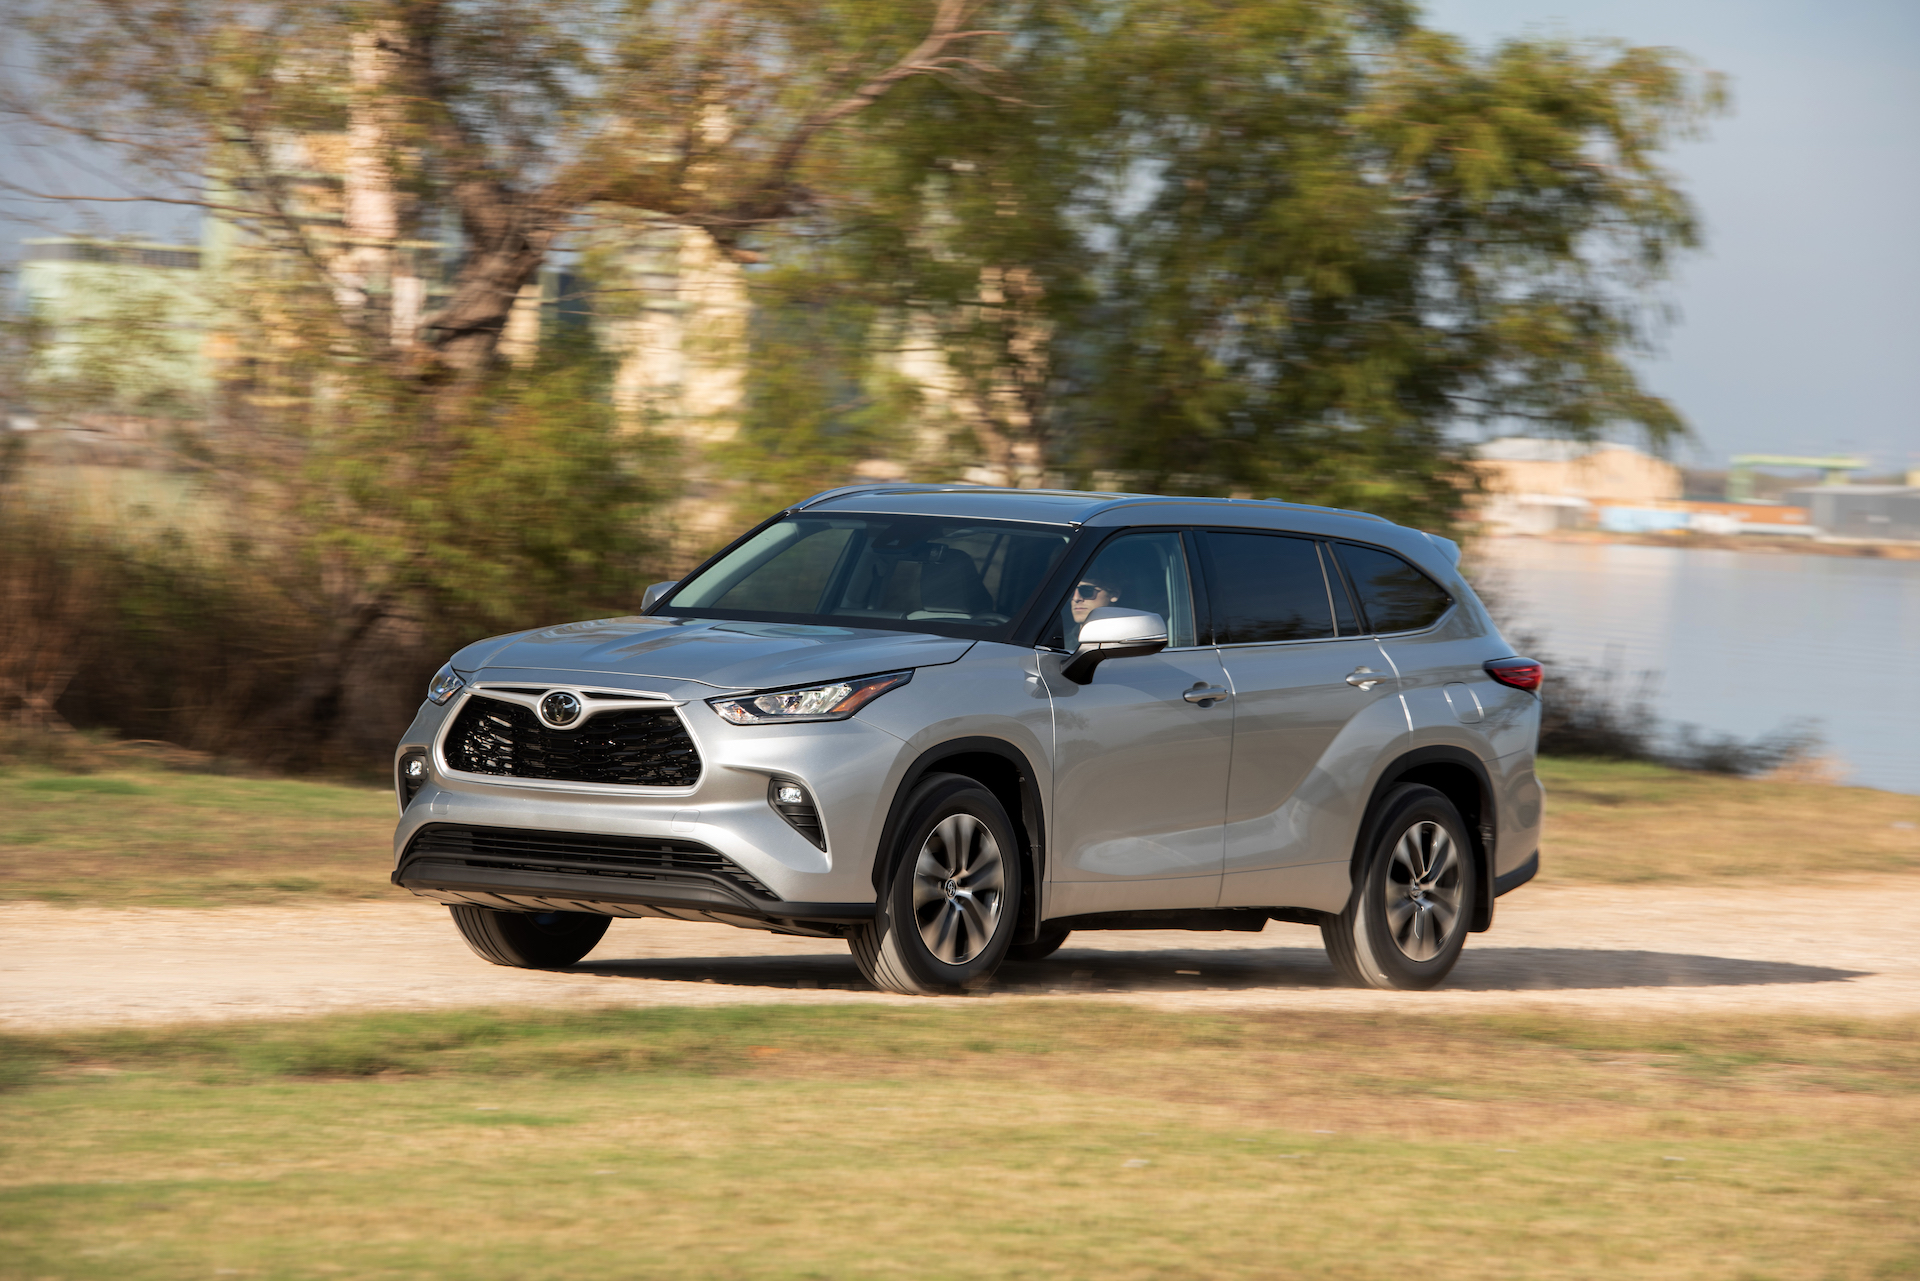 Toyota Highlander Review, Ratings, Specs, Prices, and Photo Car Connection